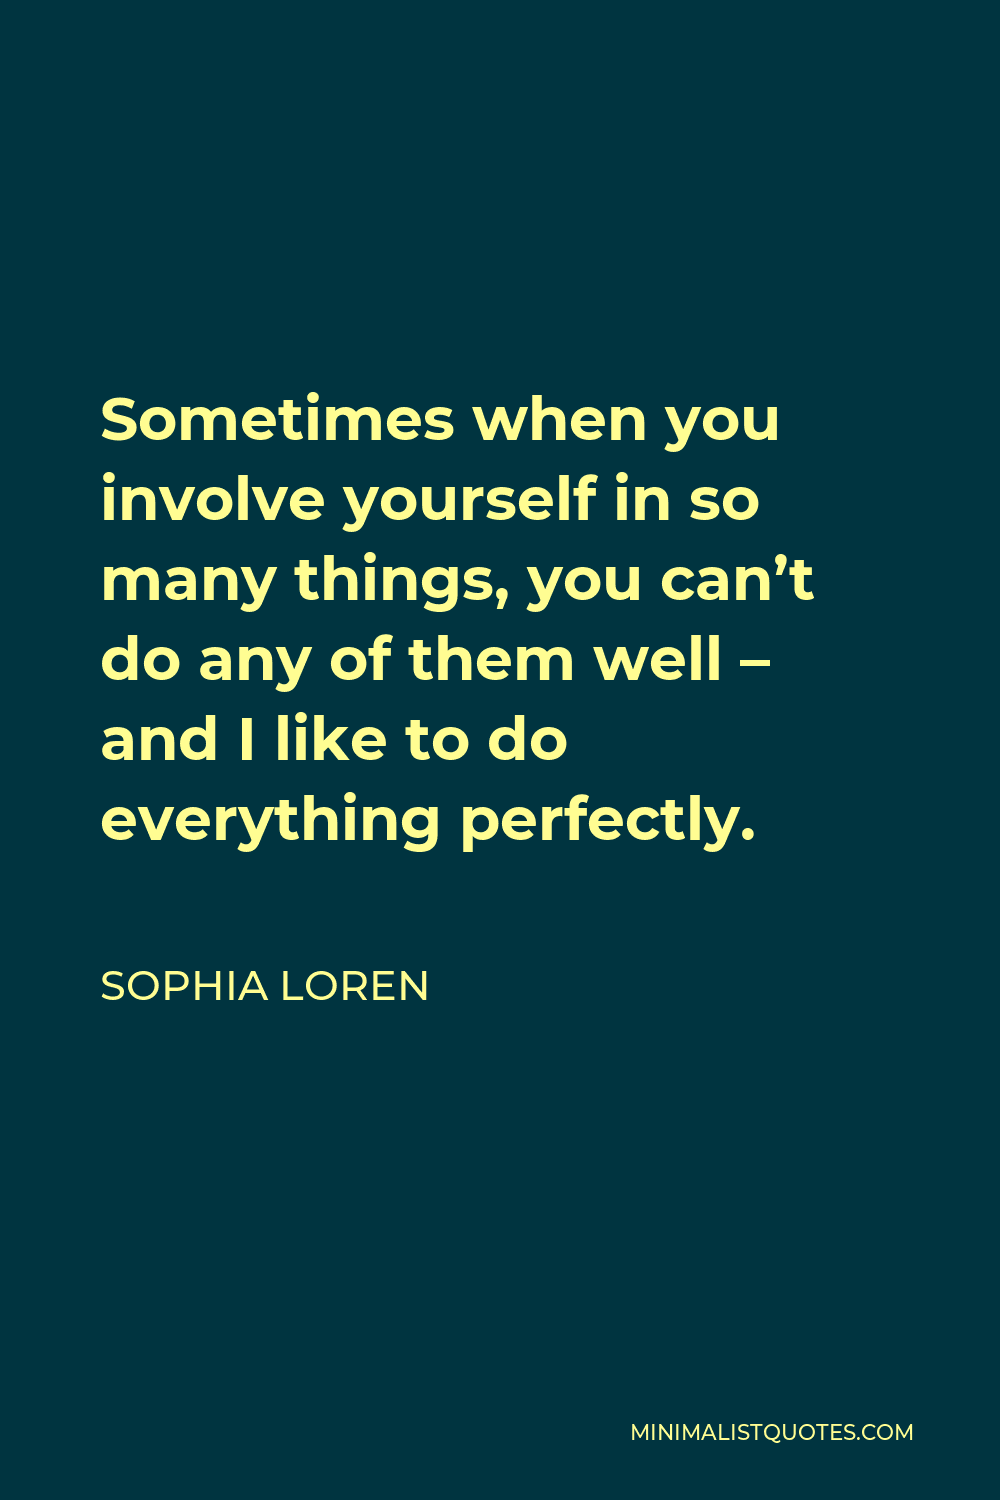 Sophia Loren Quote - Sometimes when you involve yourself in so many things, you can’t do any of them well – and I like to do everything perfectly.